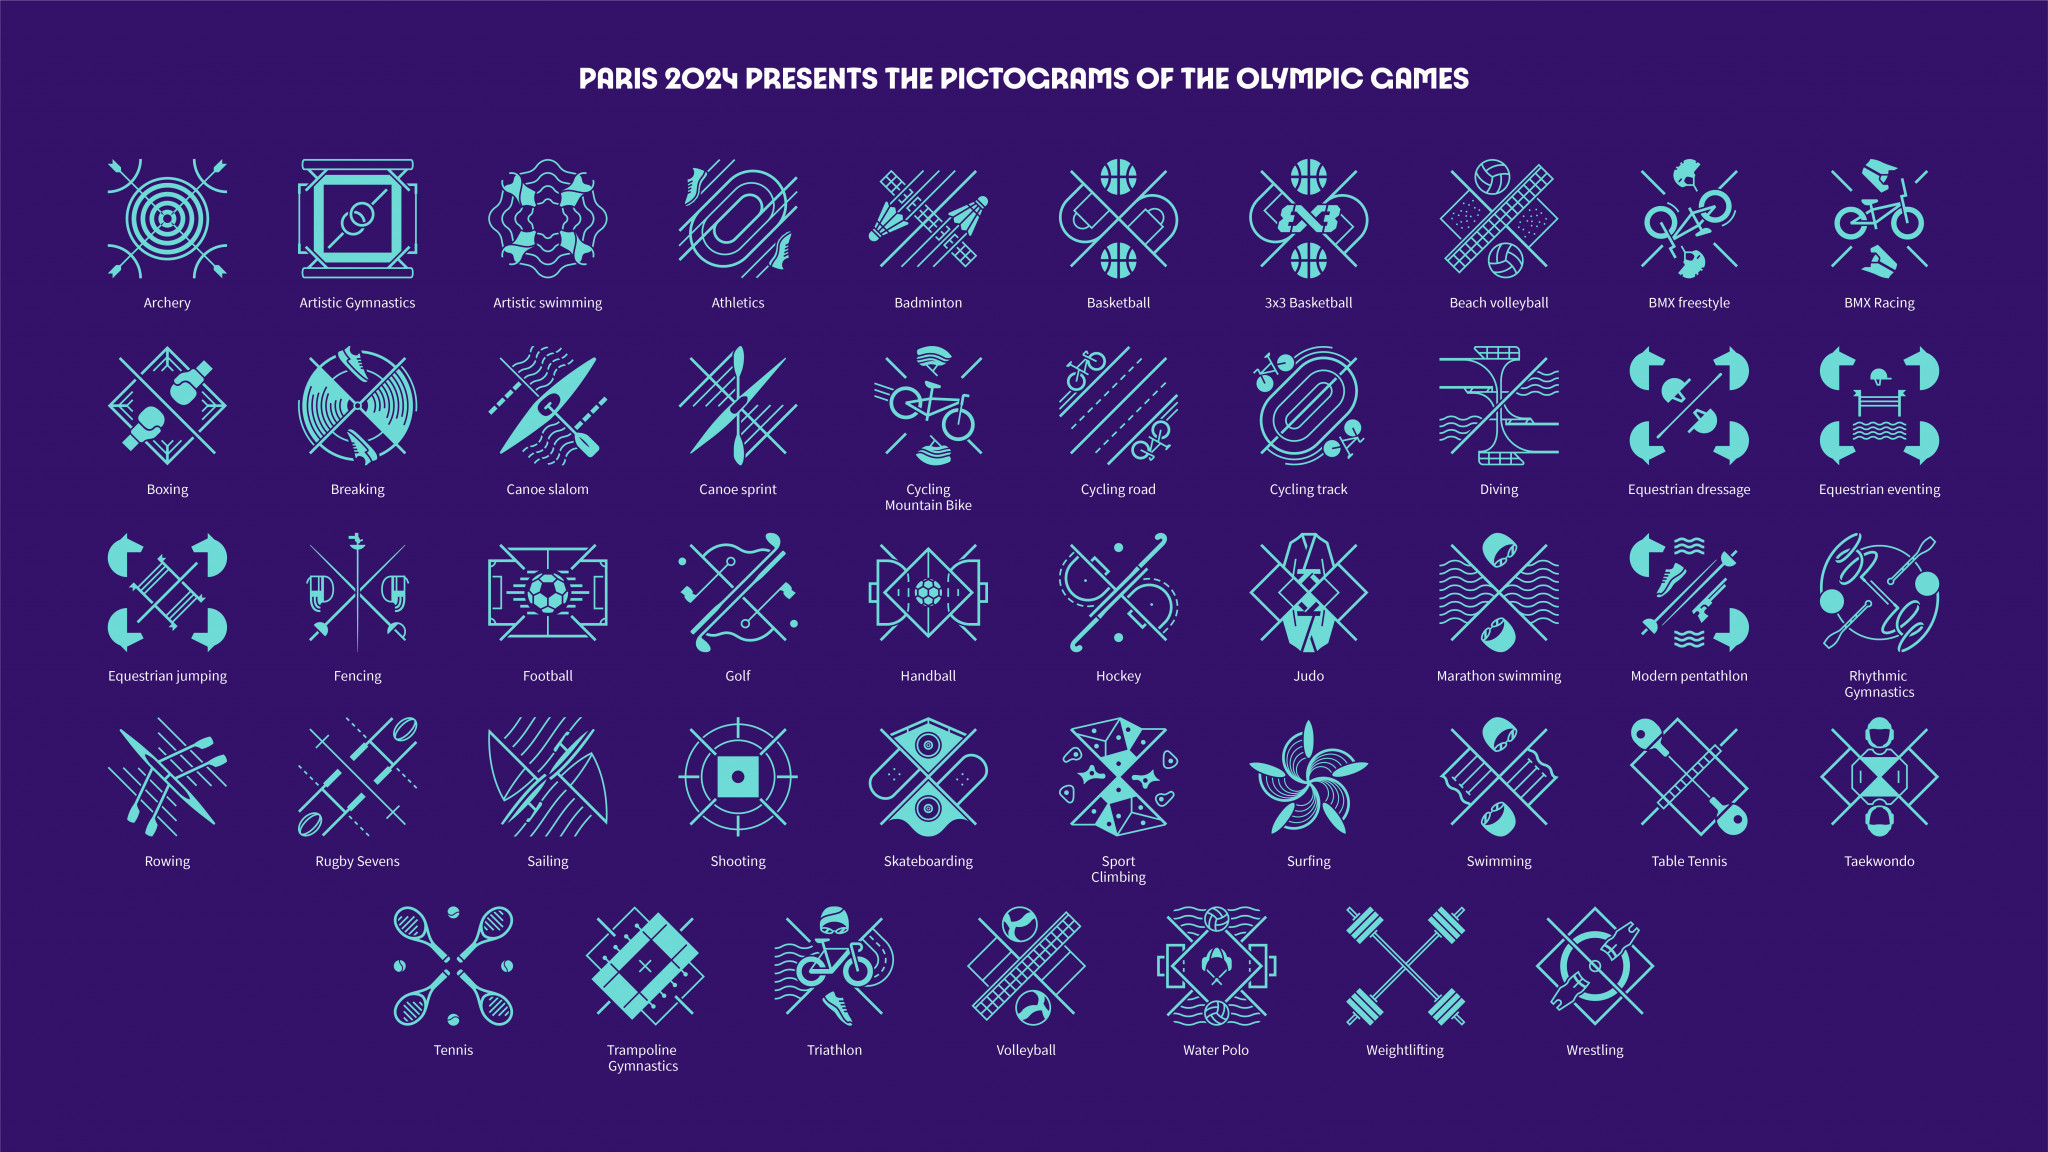 The Paris 2024 sports pictograms have consciously broken free of previous forms to create 